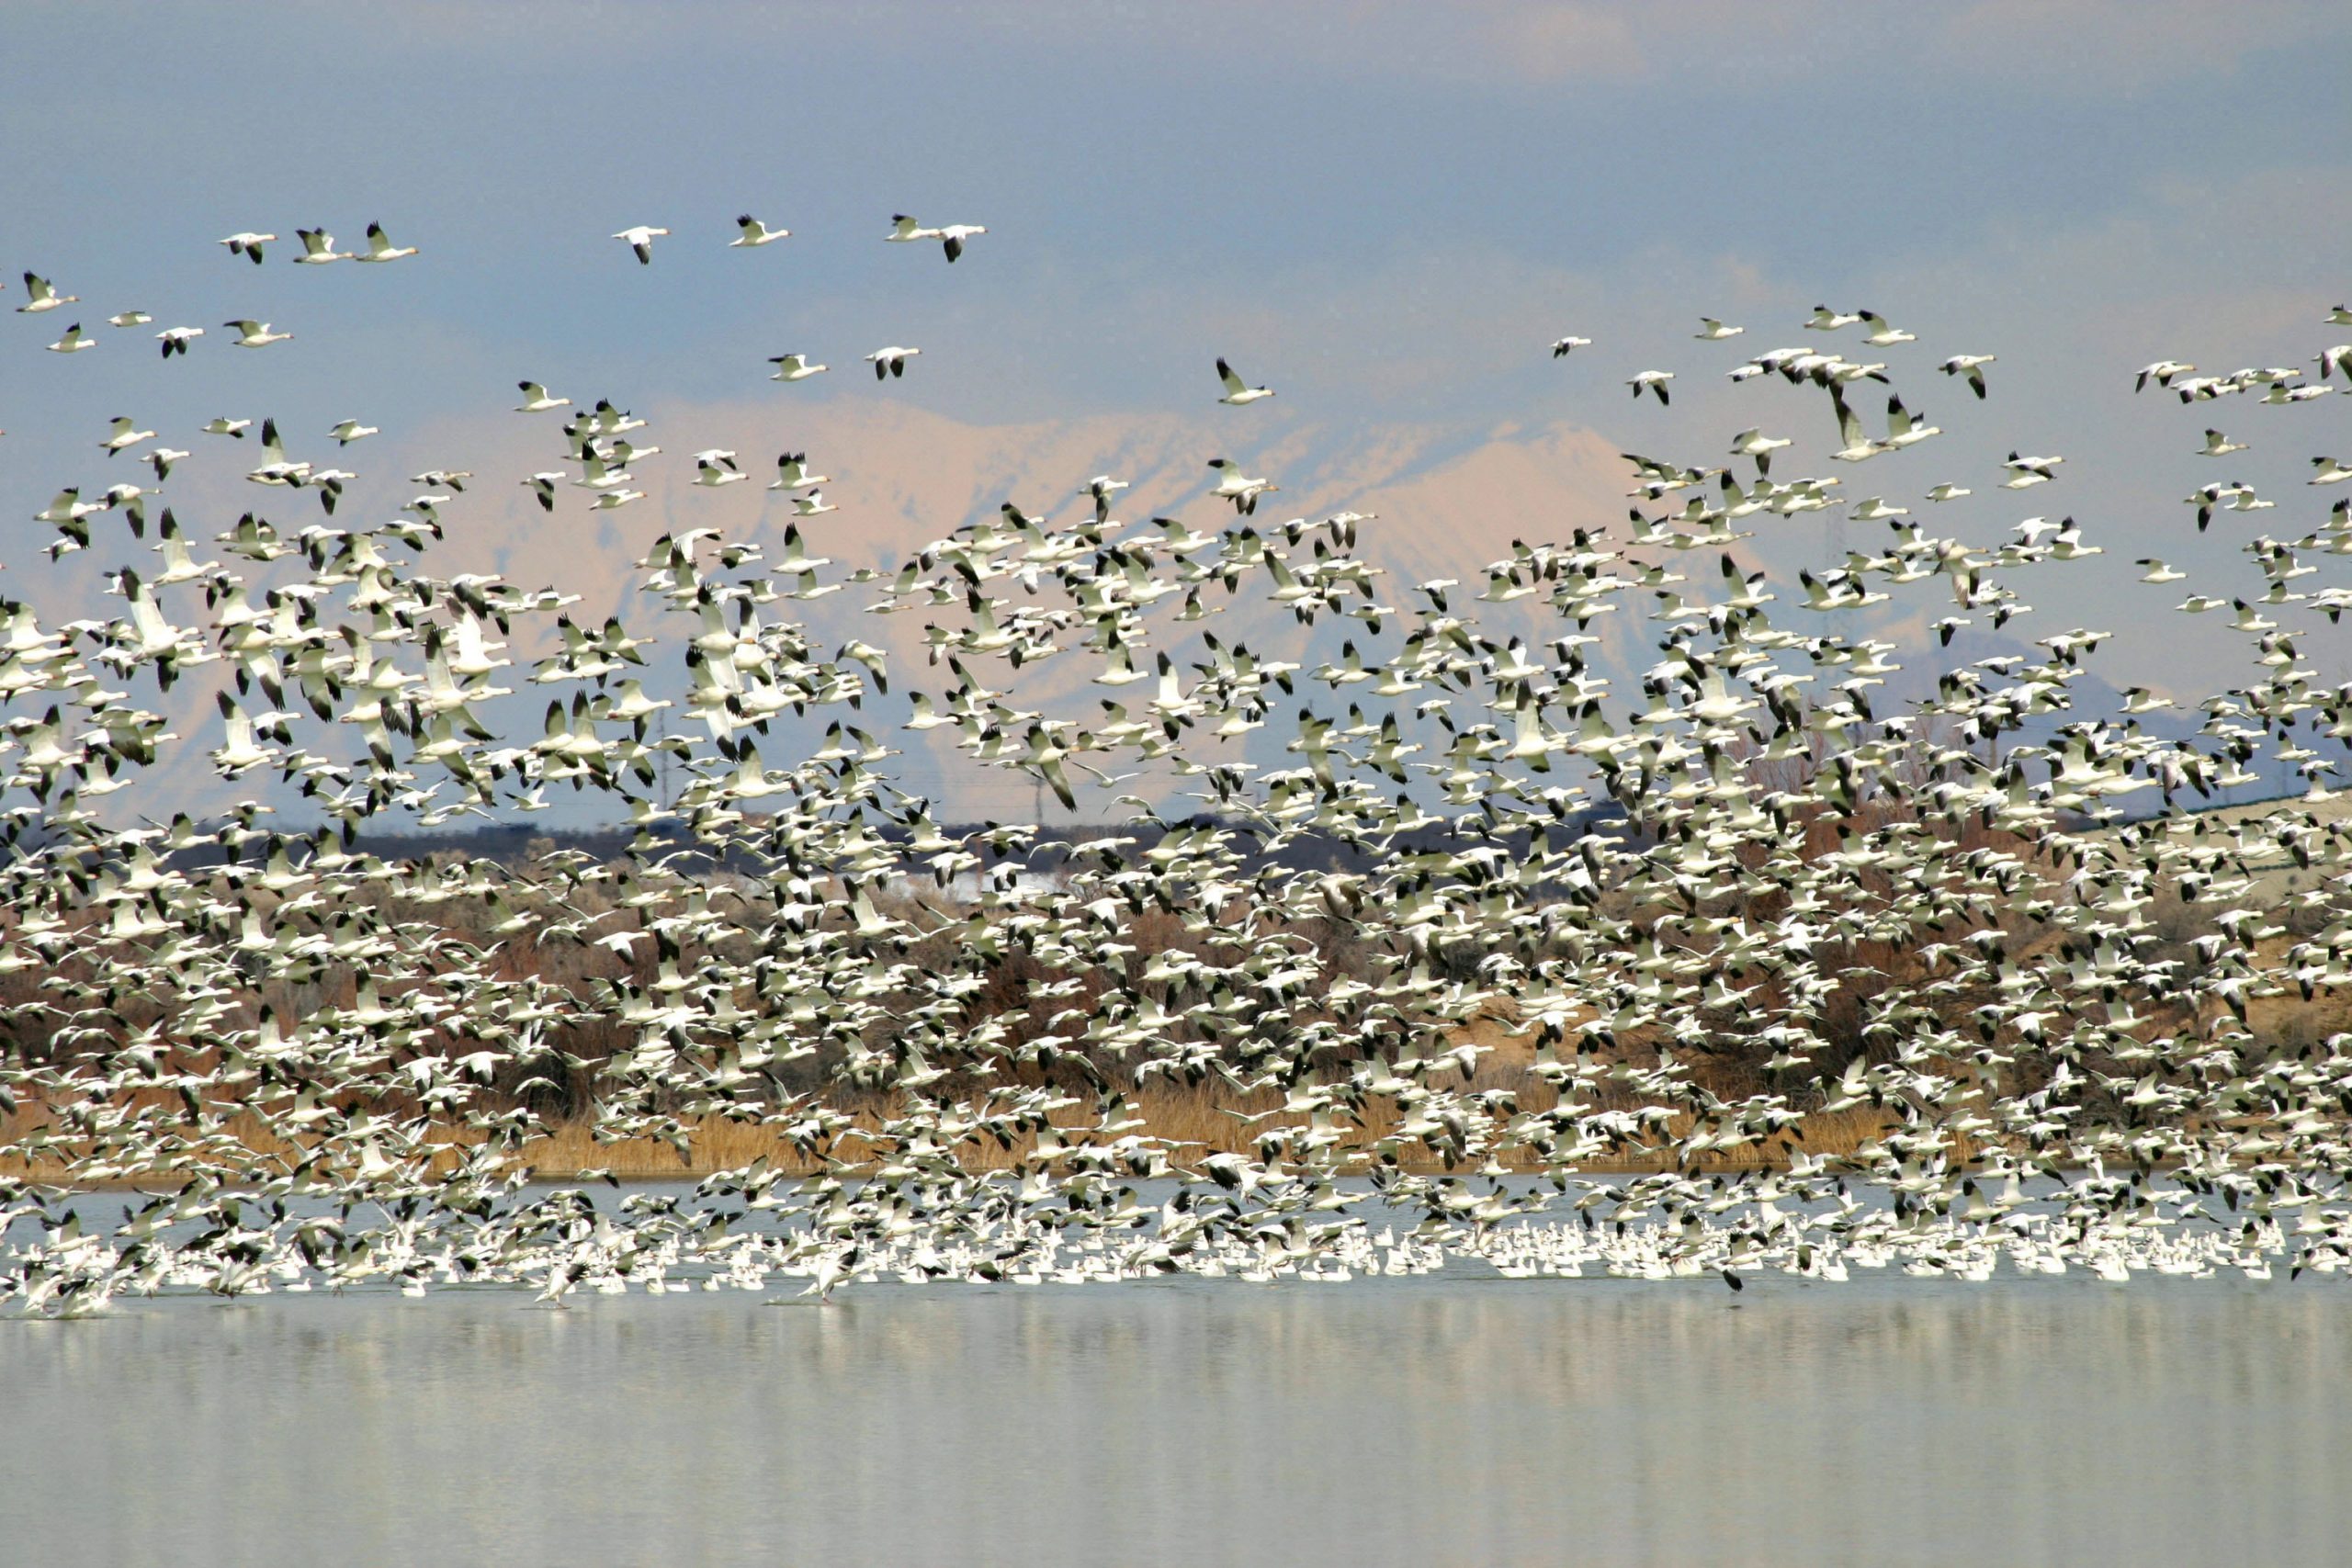 You can see thousands of snow and Ross’ geese at this year's Snow Goose Festival. (DWR)...